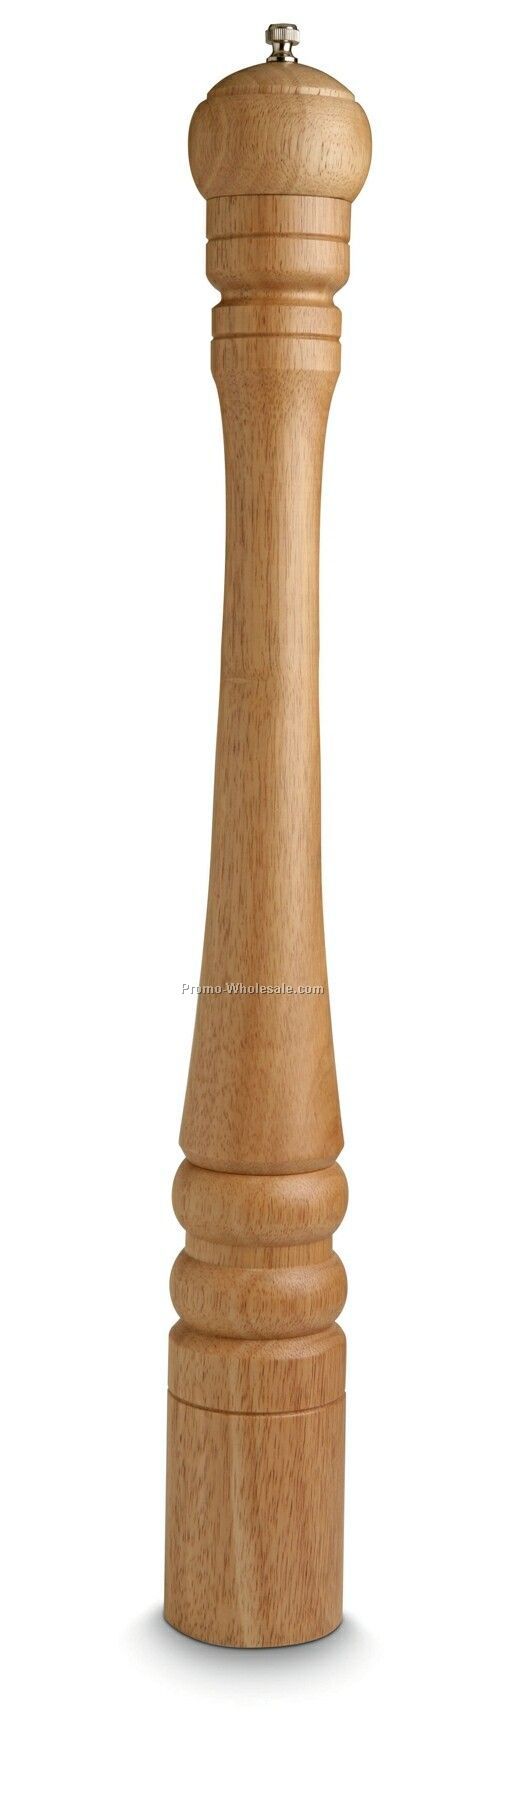 Natural Wood Pepper Mill - Giant